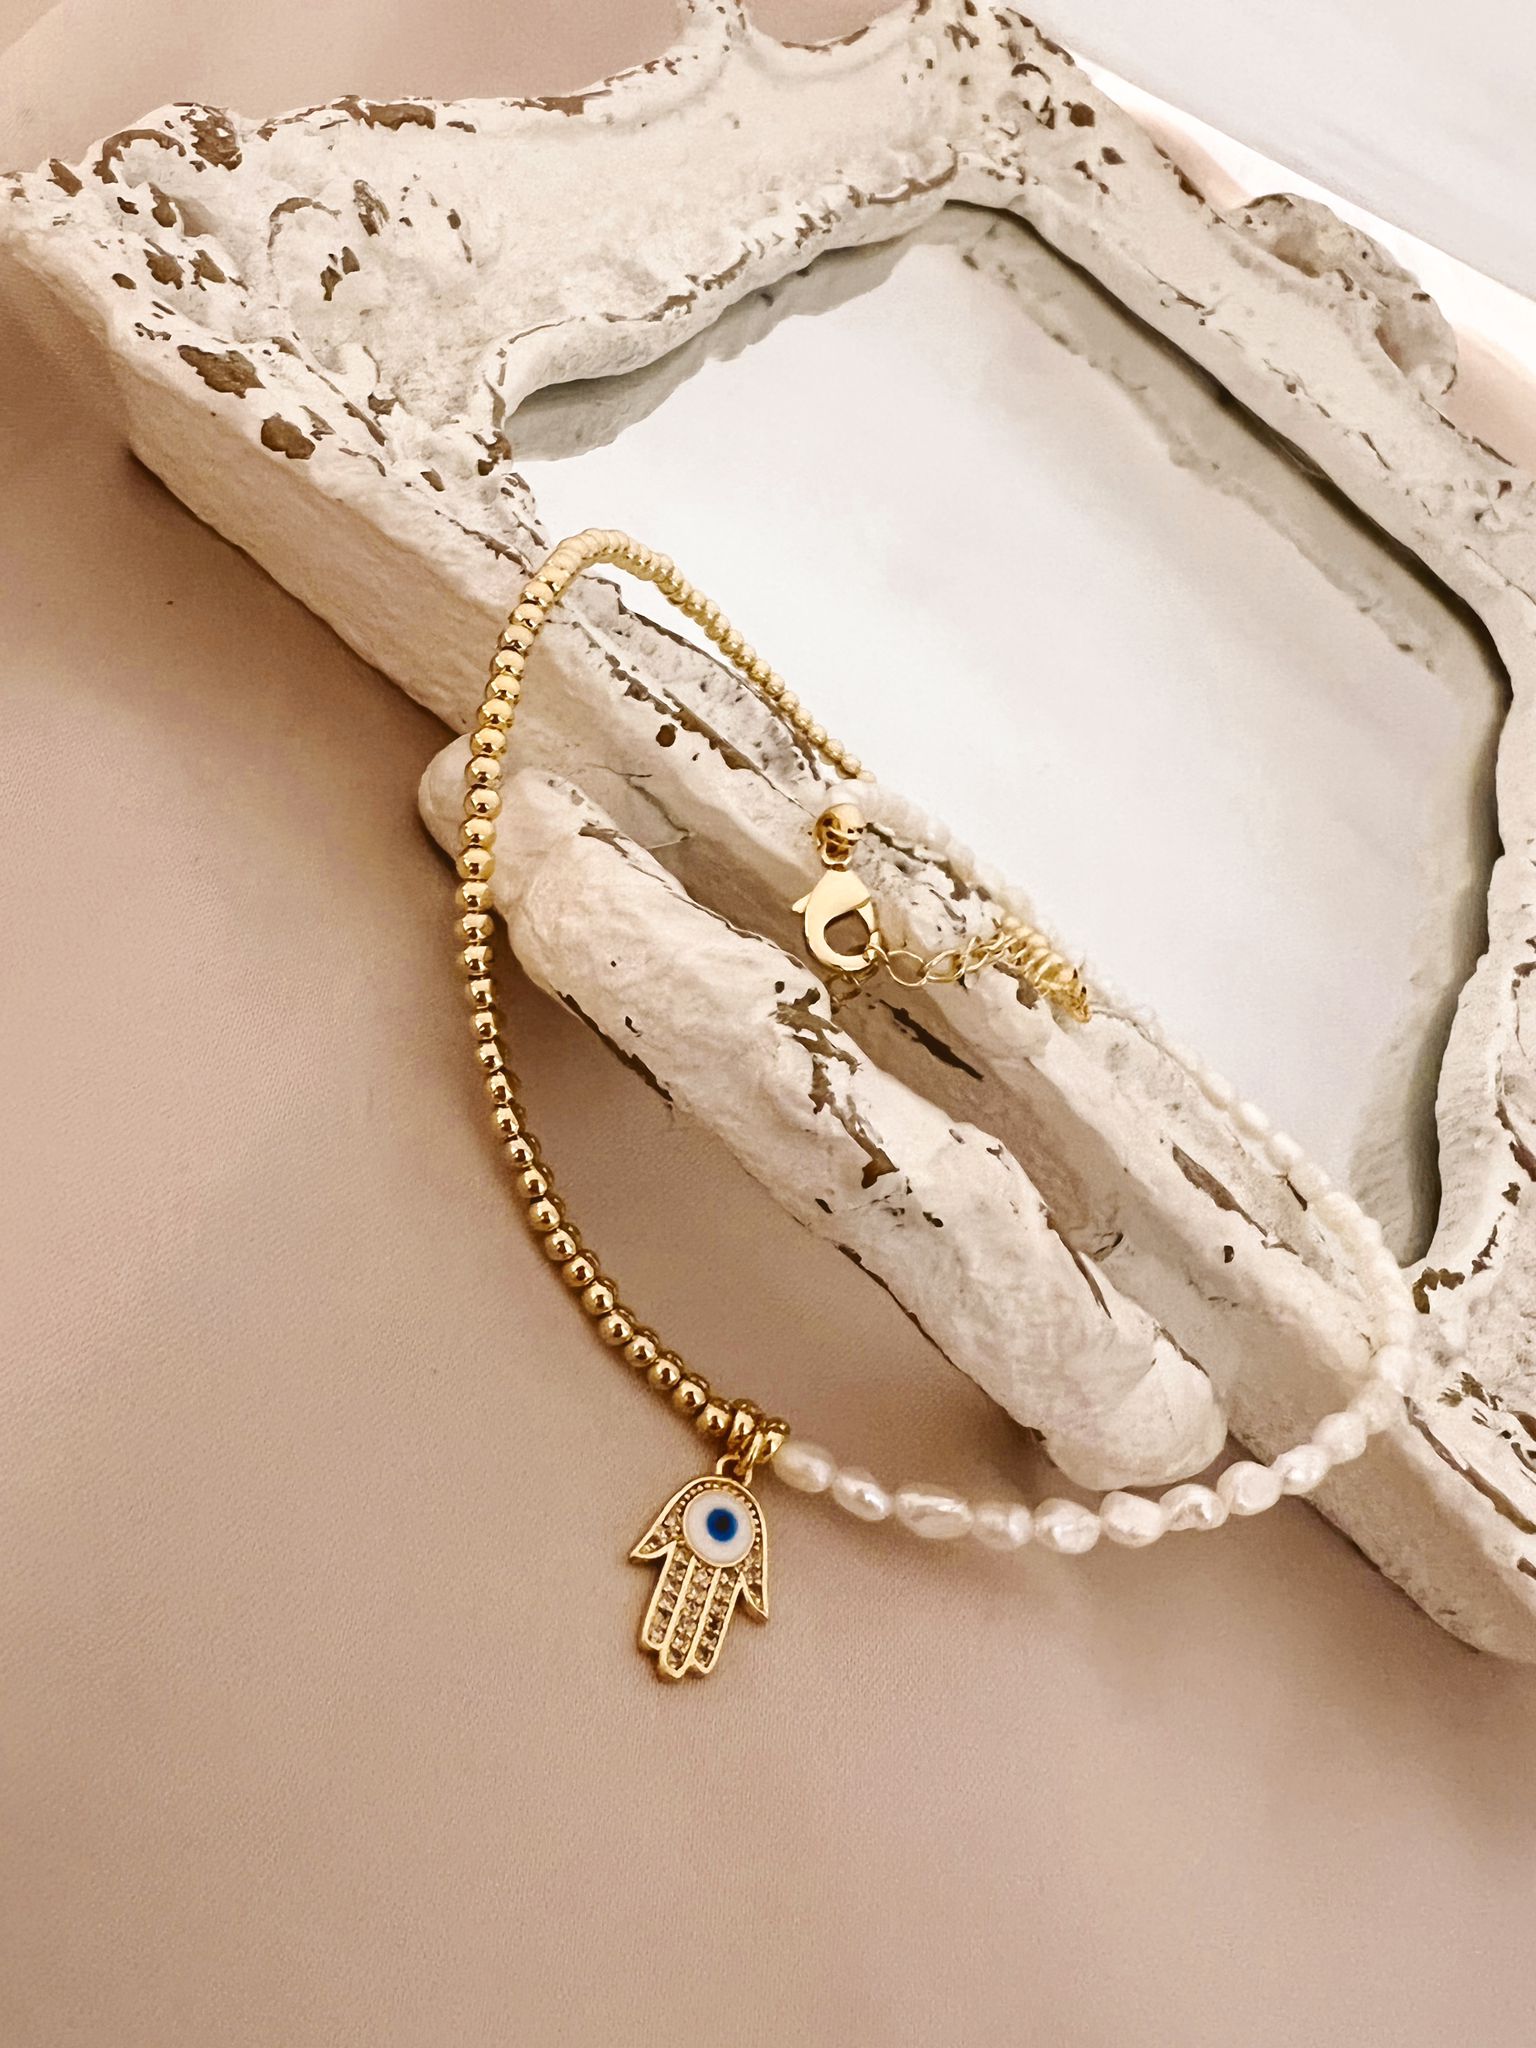 Gold Necklace with Half Pearl and Hamsa Hand Charm